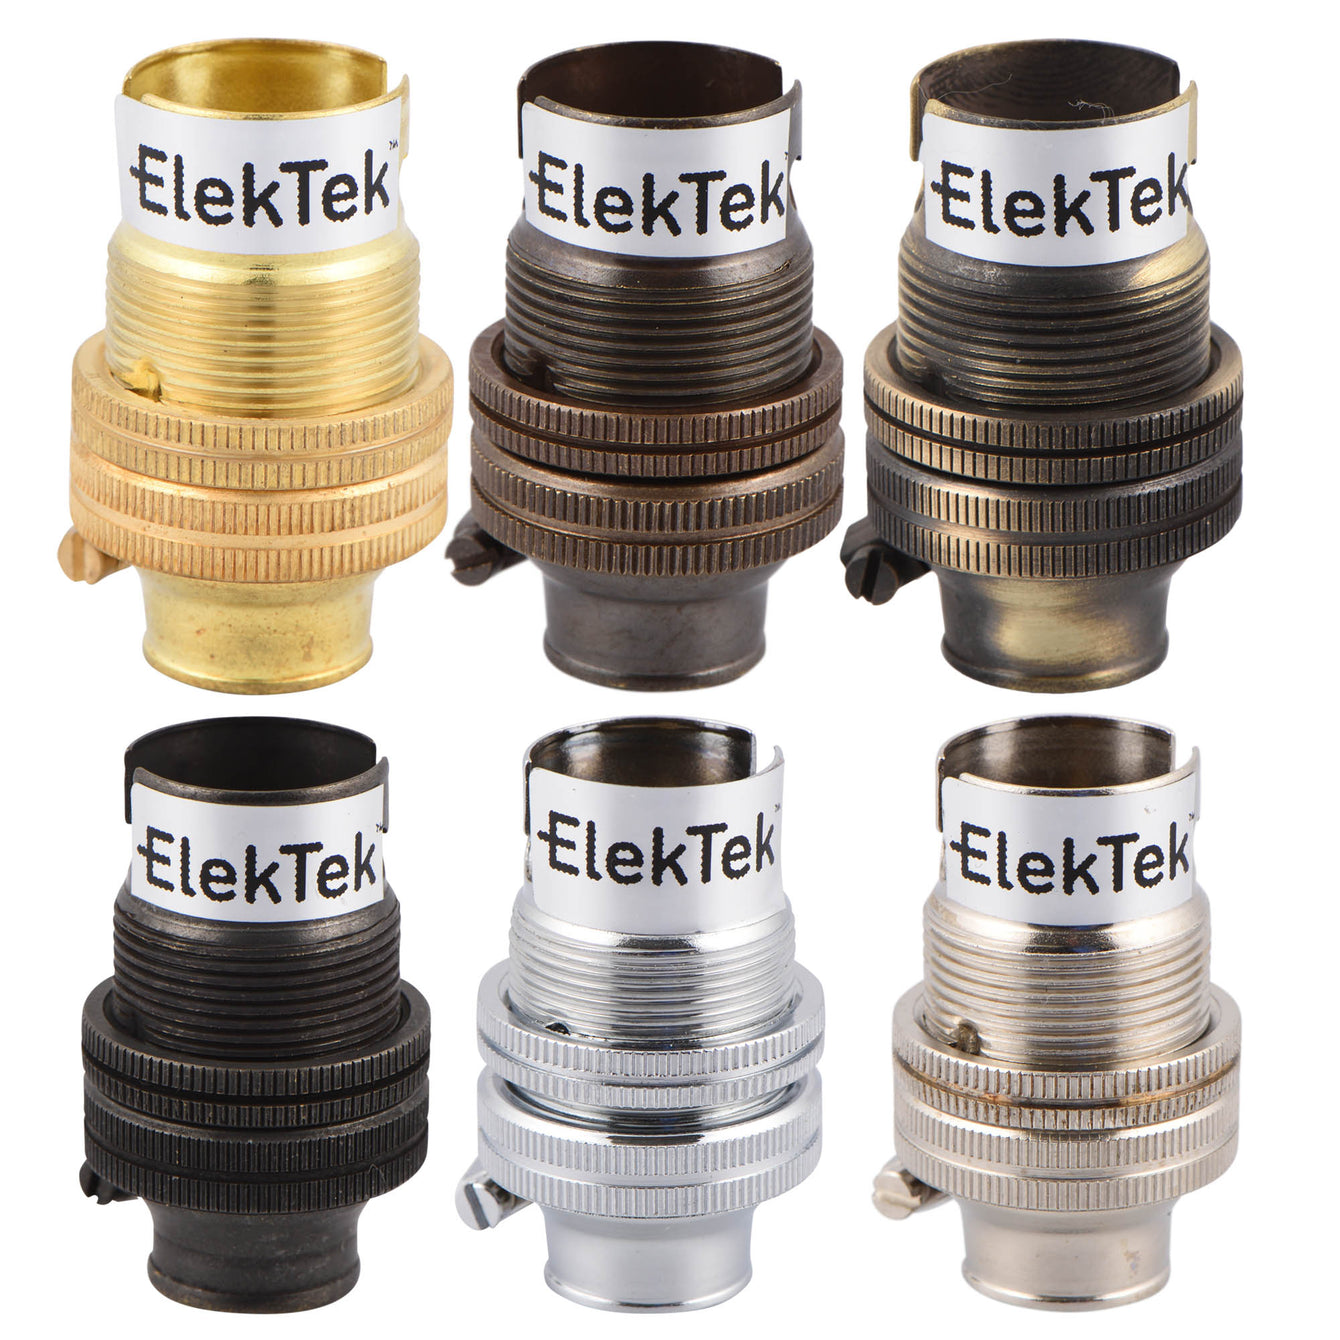 ElekTek Lamp Holder 10mm or Half Inch Entry Miniature Small Bayonet Cap SBC B15 With Shade Ring Solid Brass - Buy It Better Brass / 10mm